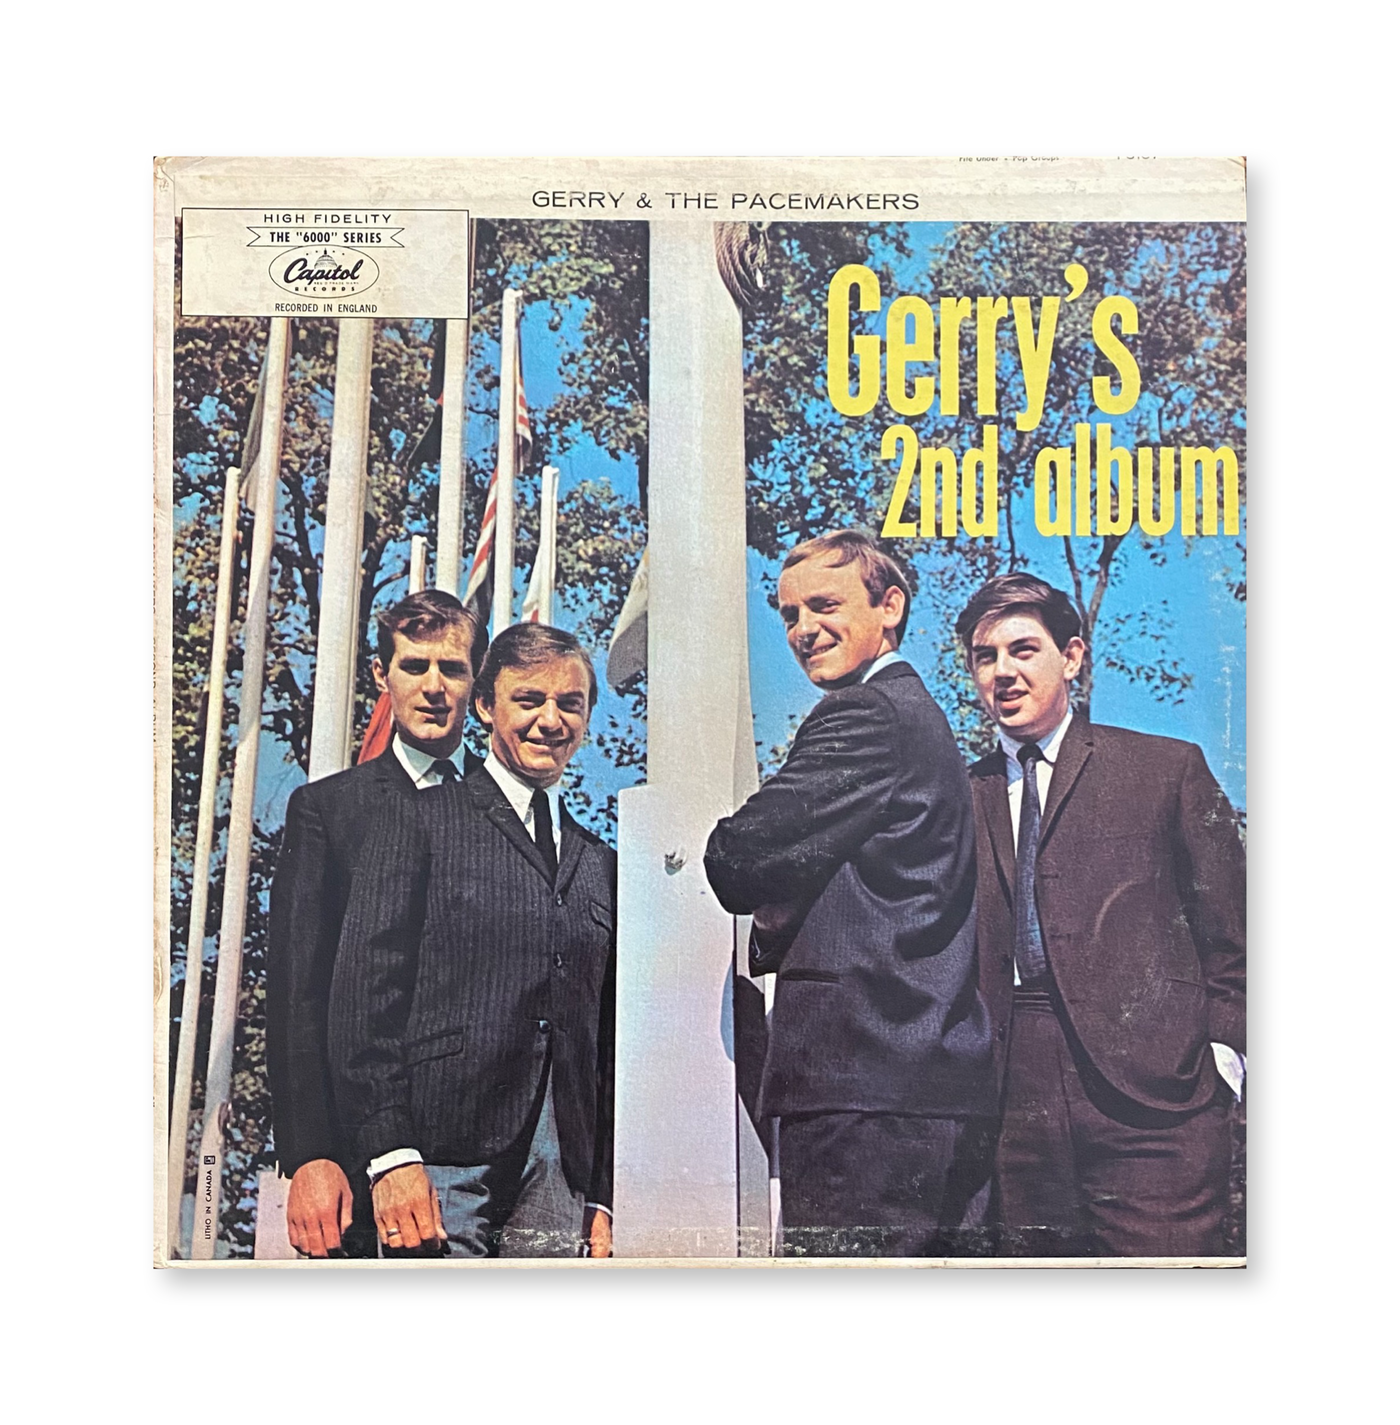 Gerry & The Pacemakers - Gerry's 2nd Album